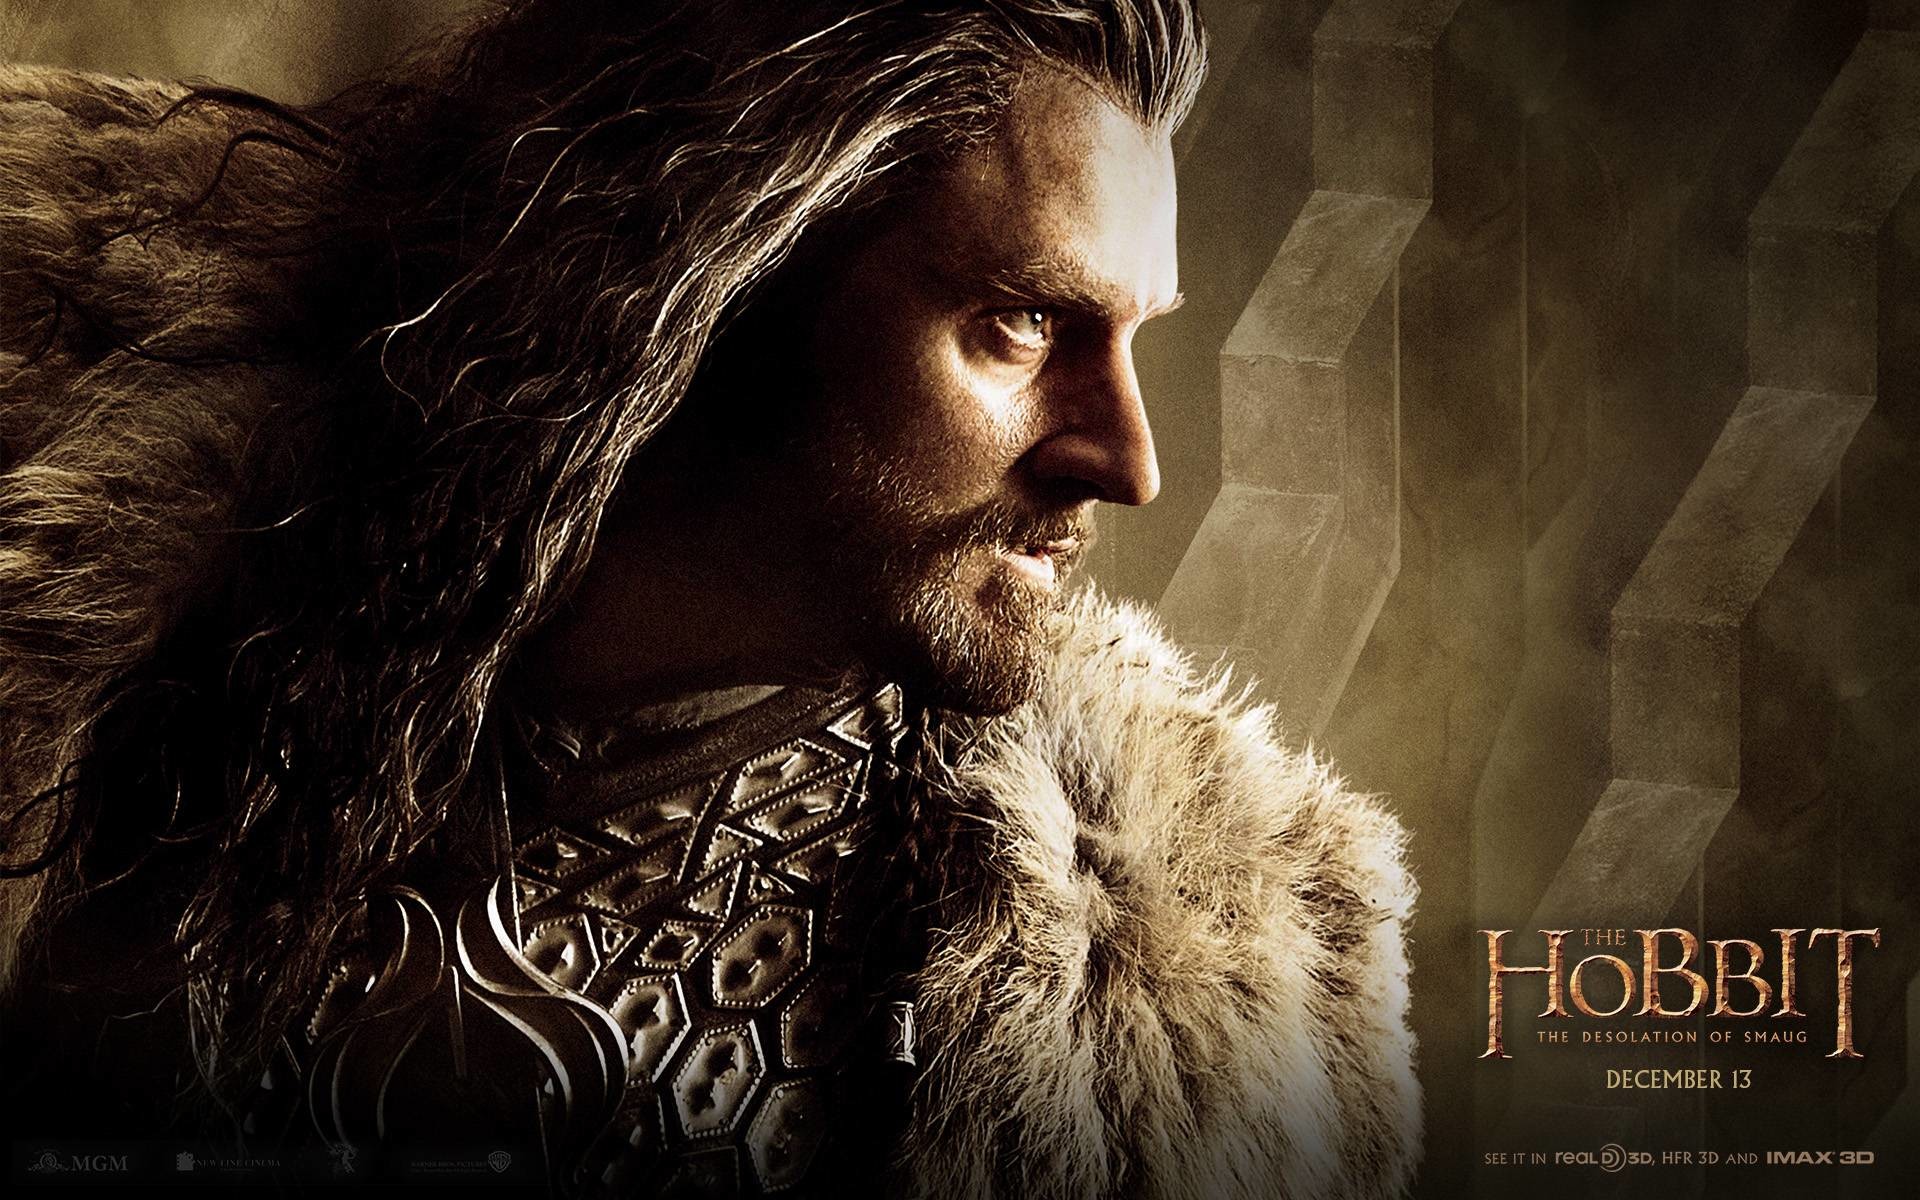 1920x1200 Wallpapers of The Hobbit HD, Sarai Myer for PC & Mac, Laptop, Tablet,  Mobile Phone